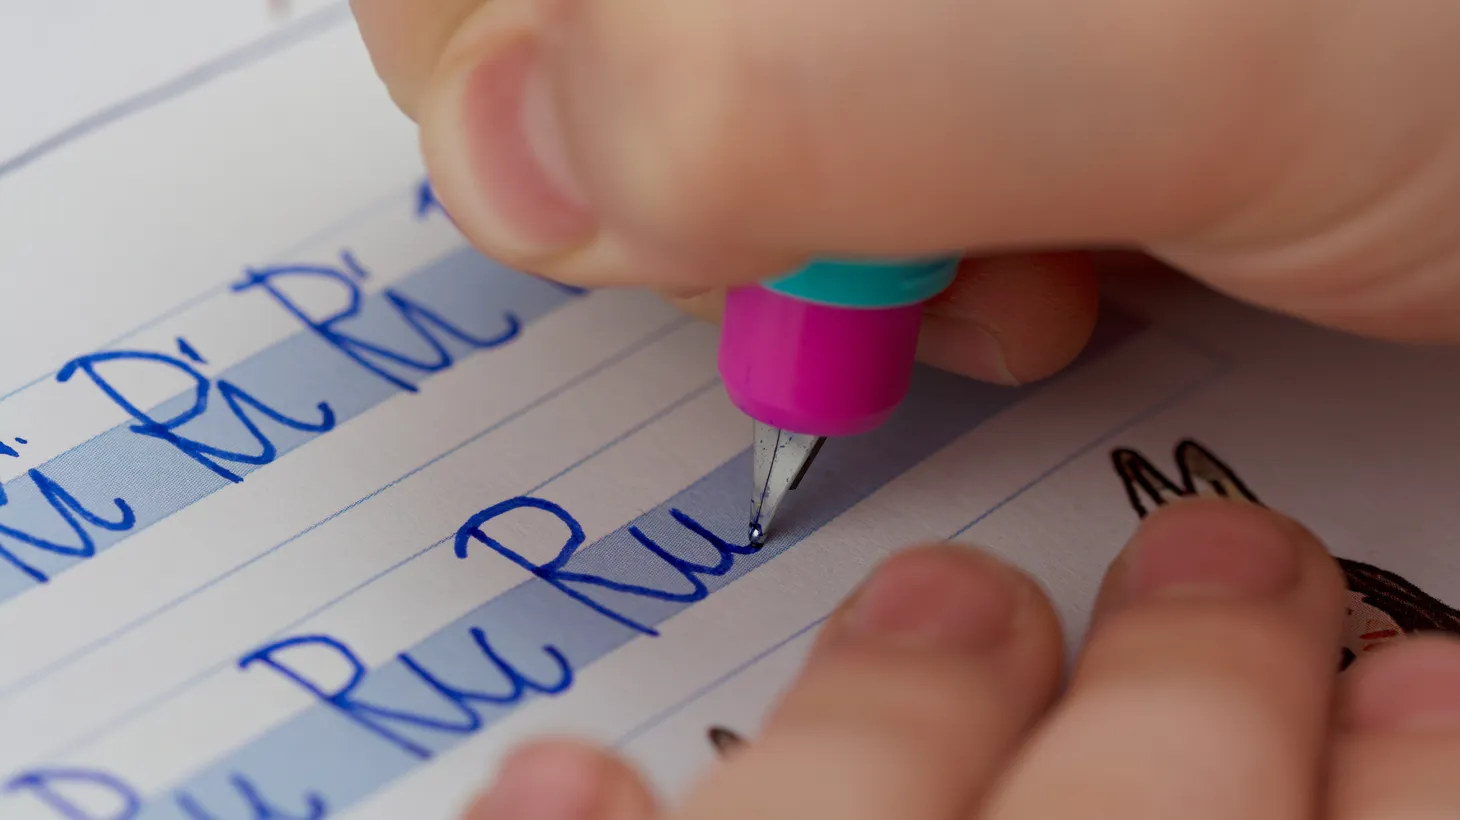 Some occupational therapists say cursive helps kids with dyslexia focus and improve reading and writing skills.